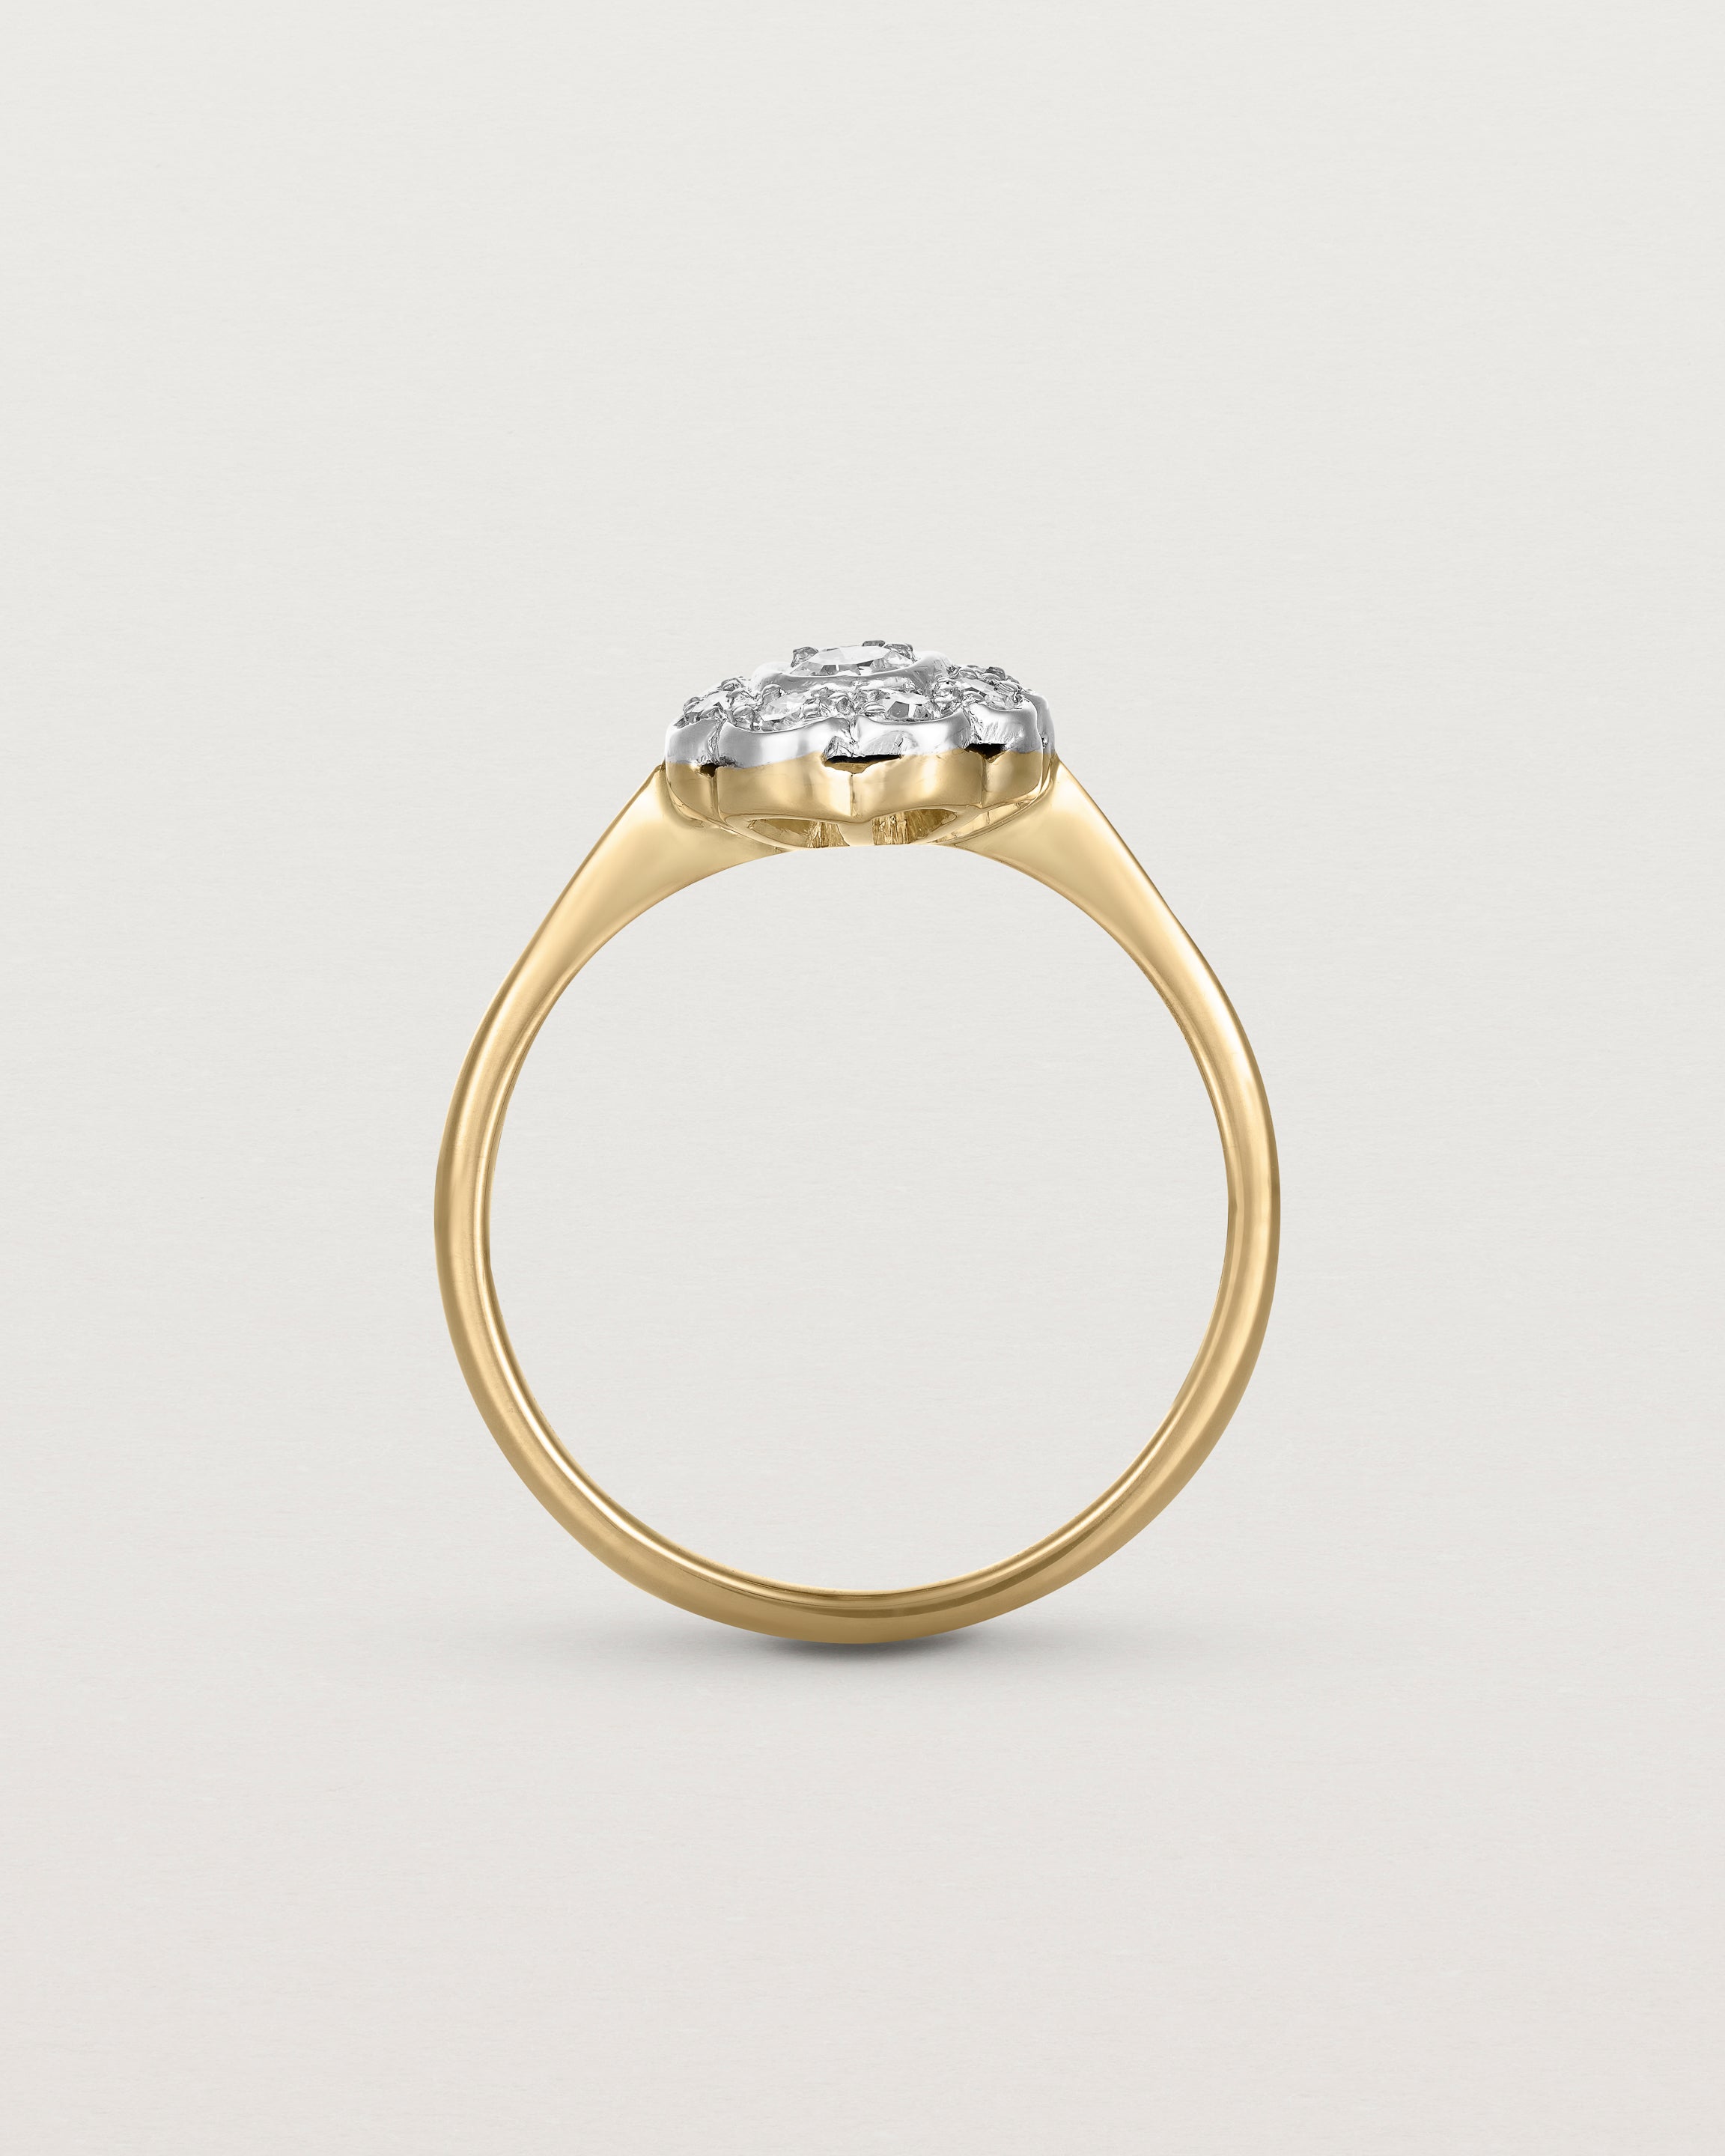 Standing view of the Clementine Vintage Ring | Diamonds.